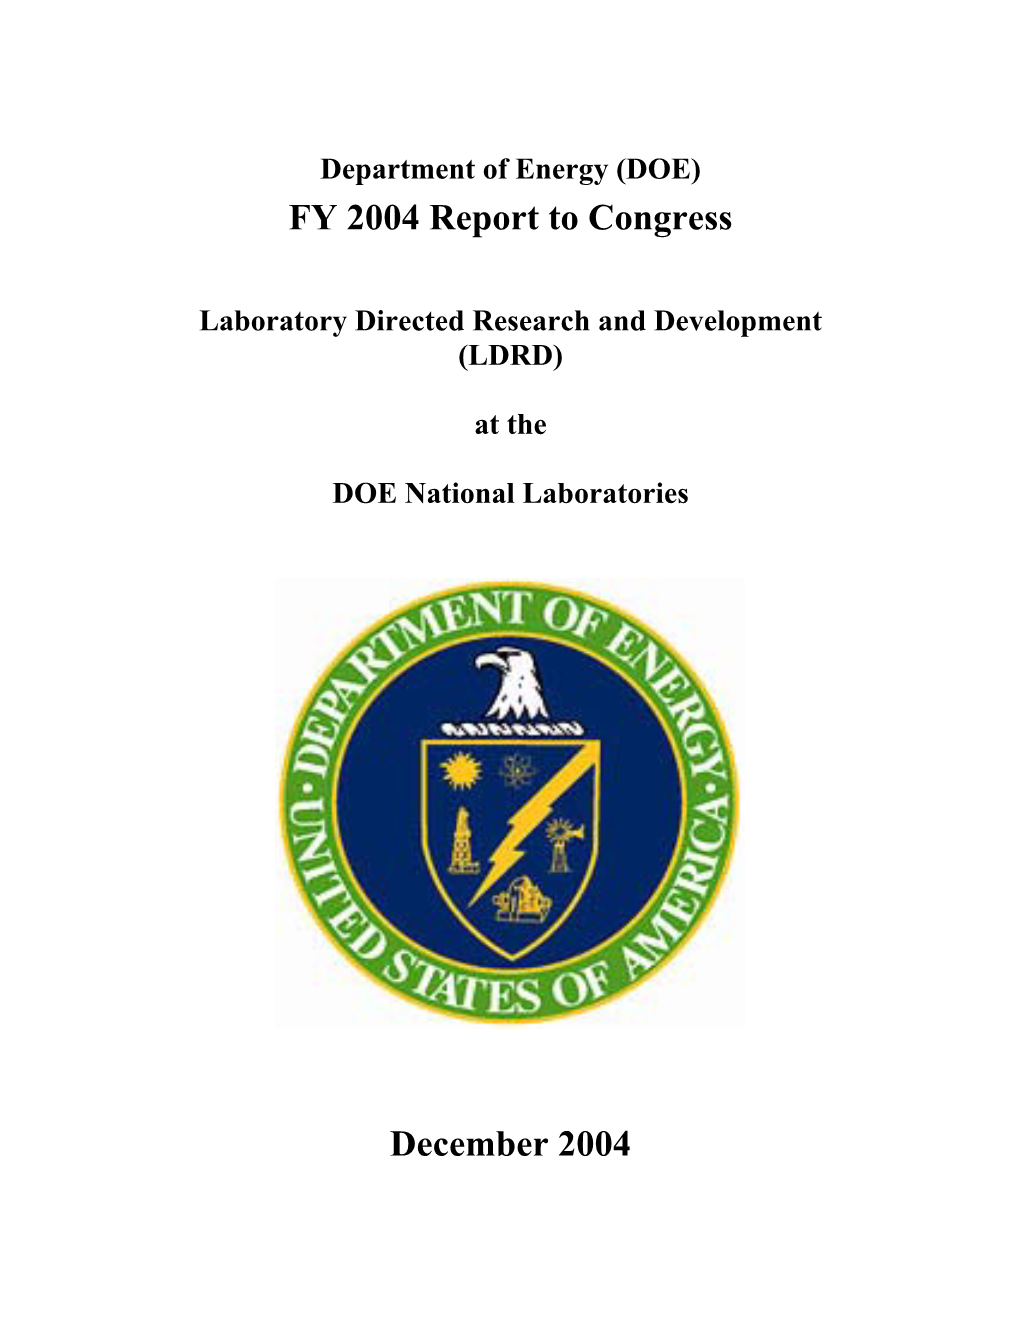 FY 2004 LDRD Report to Congress